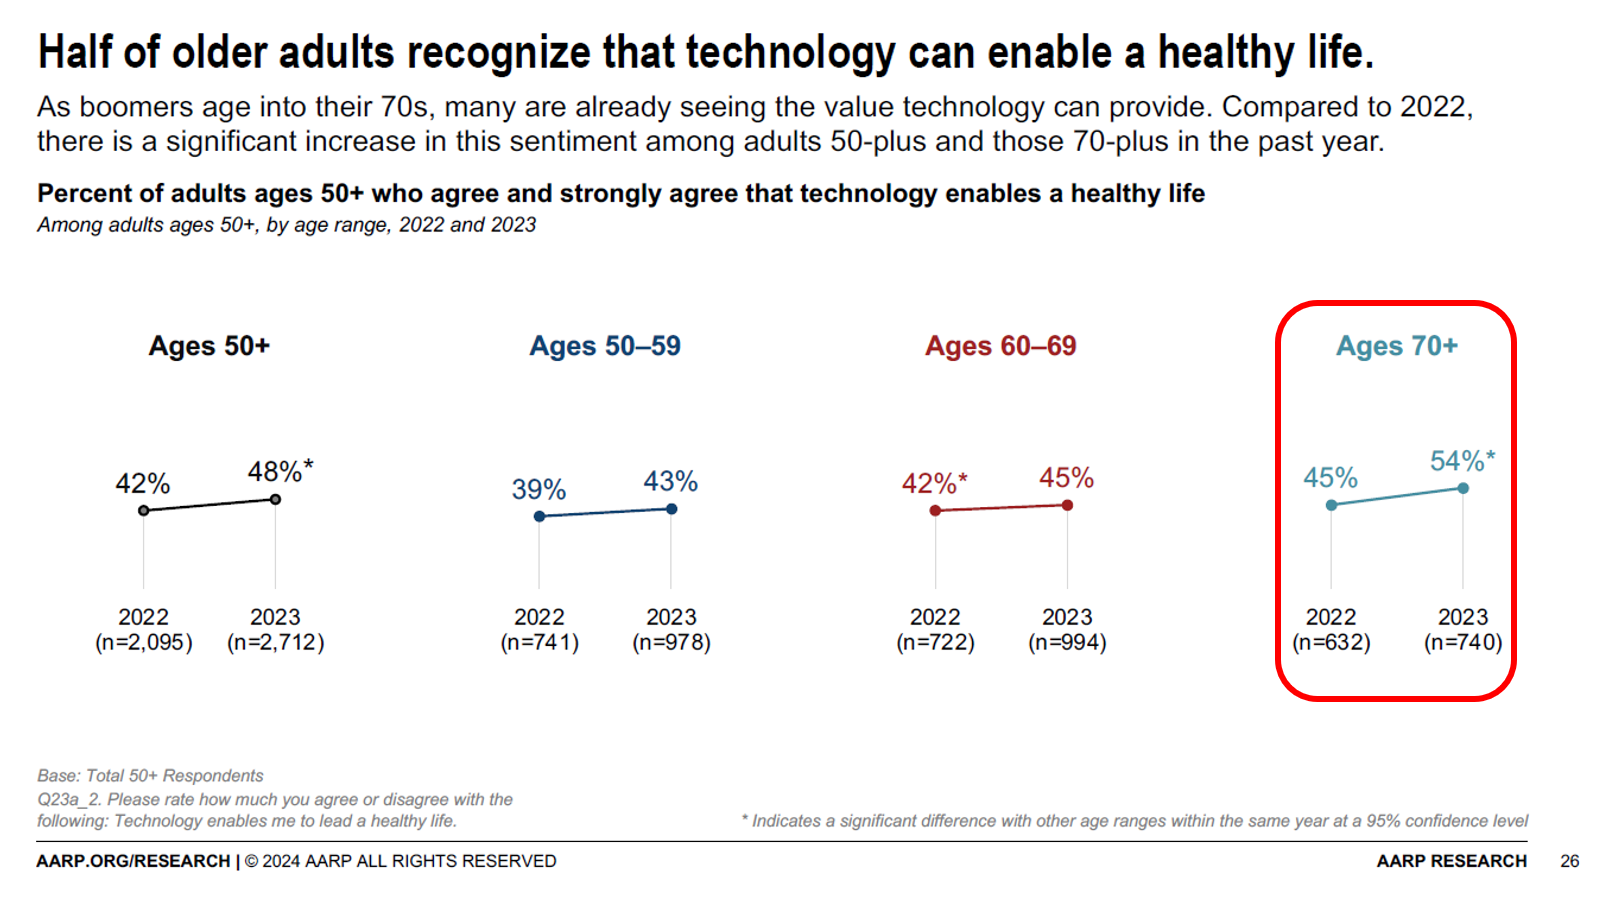 Technology Is Playing a Growing Role in Wellness and Healthy Aging – AARP’s Latest Look Into the 50+ Tech Consumer